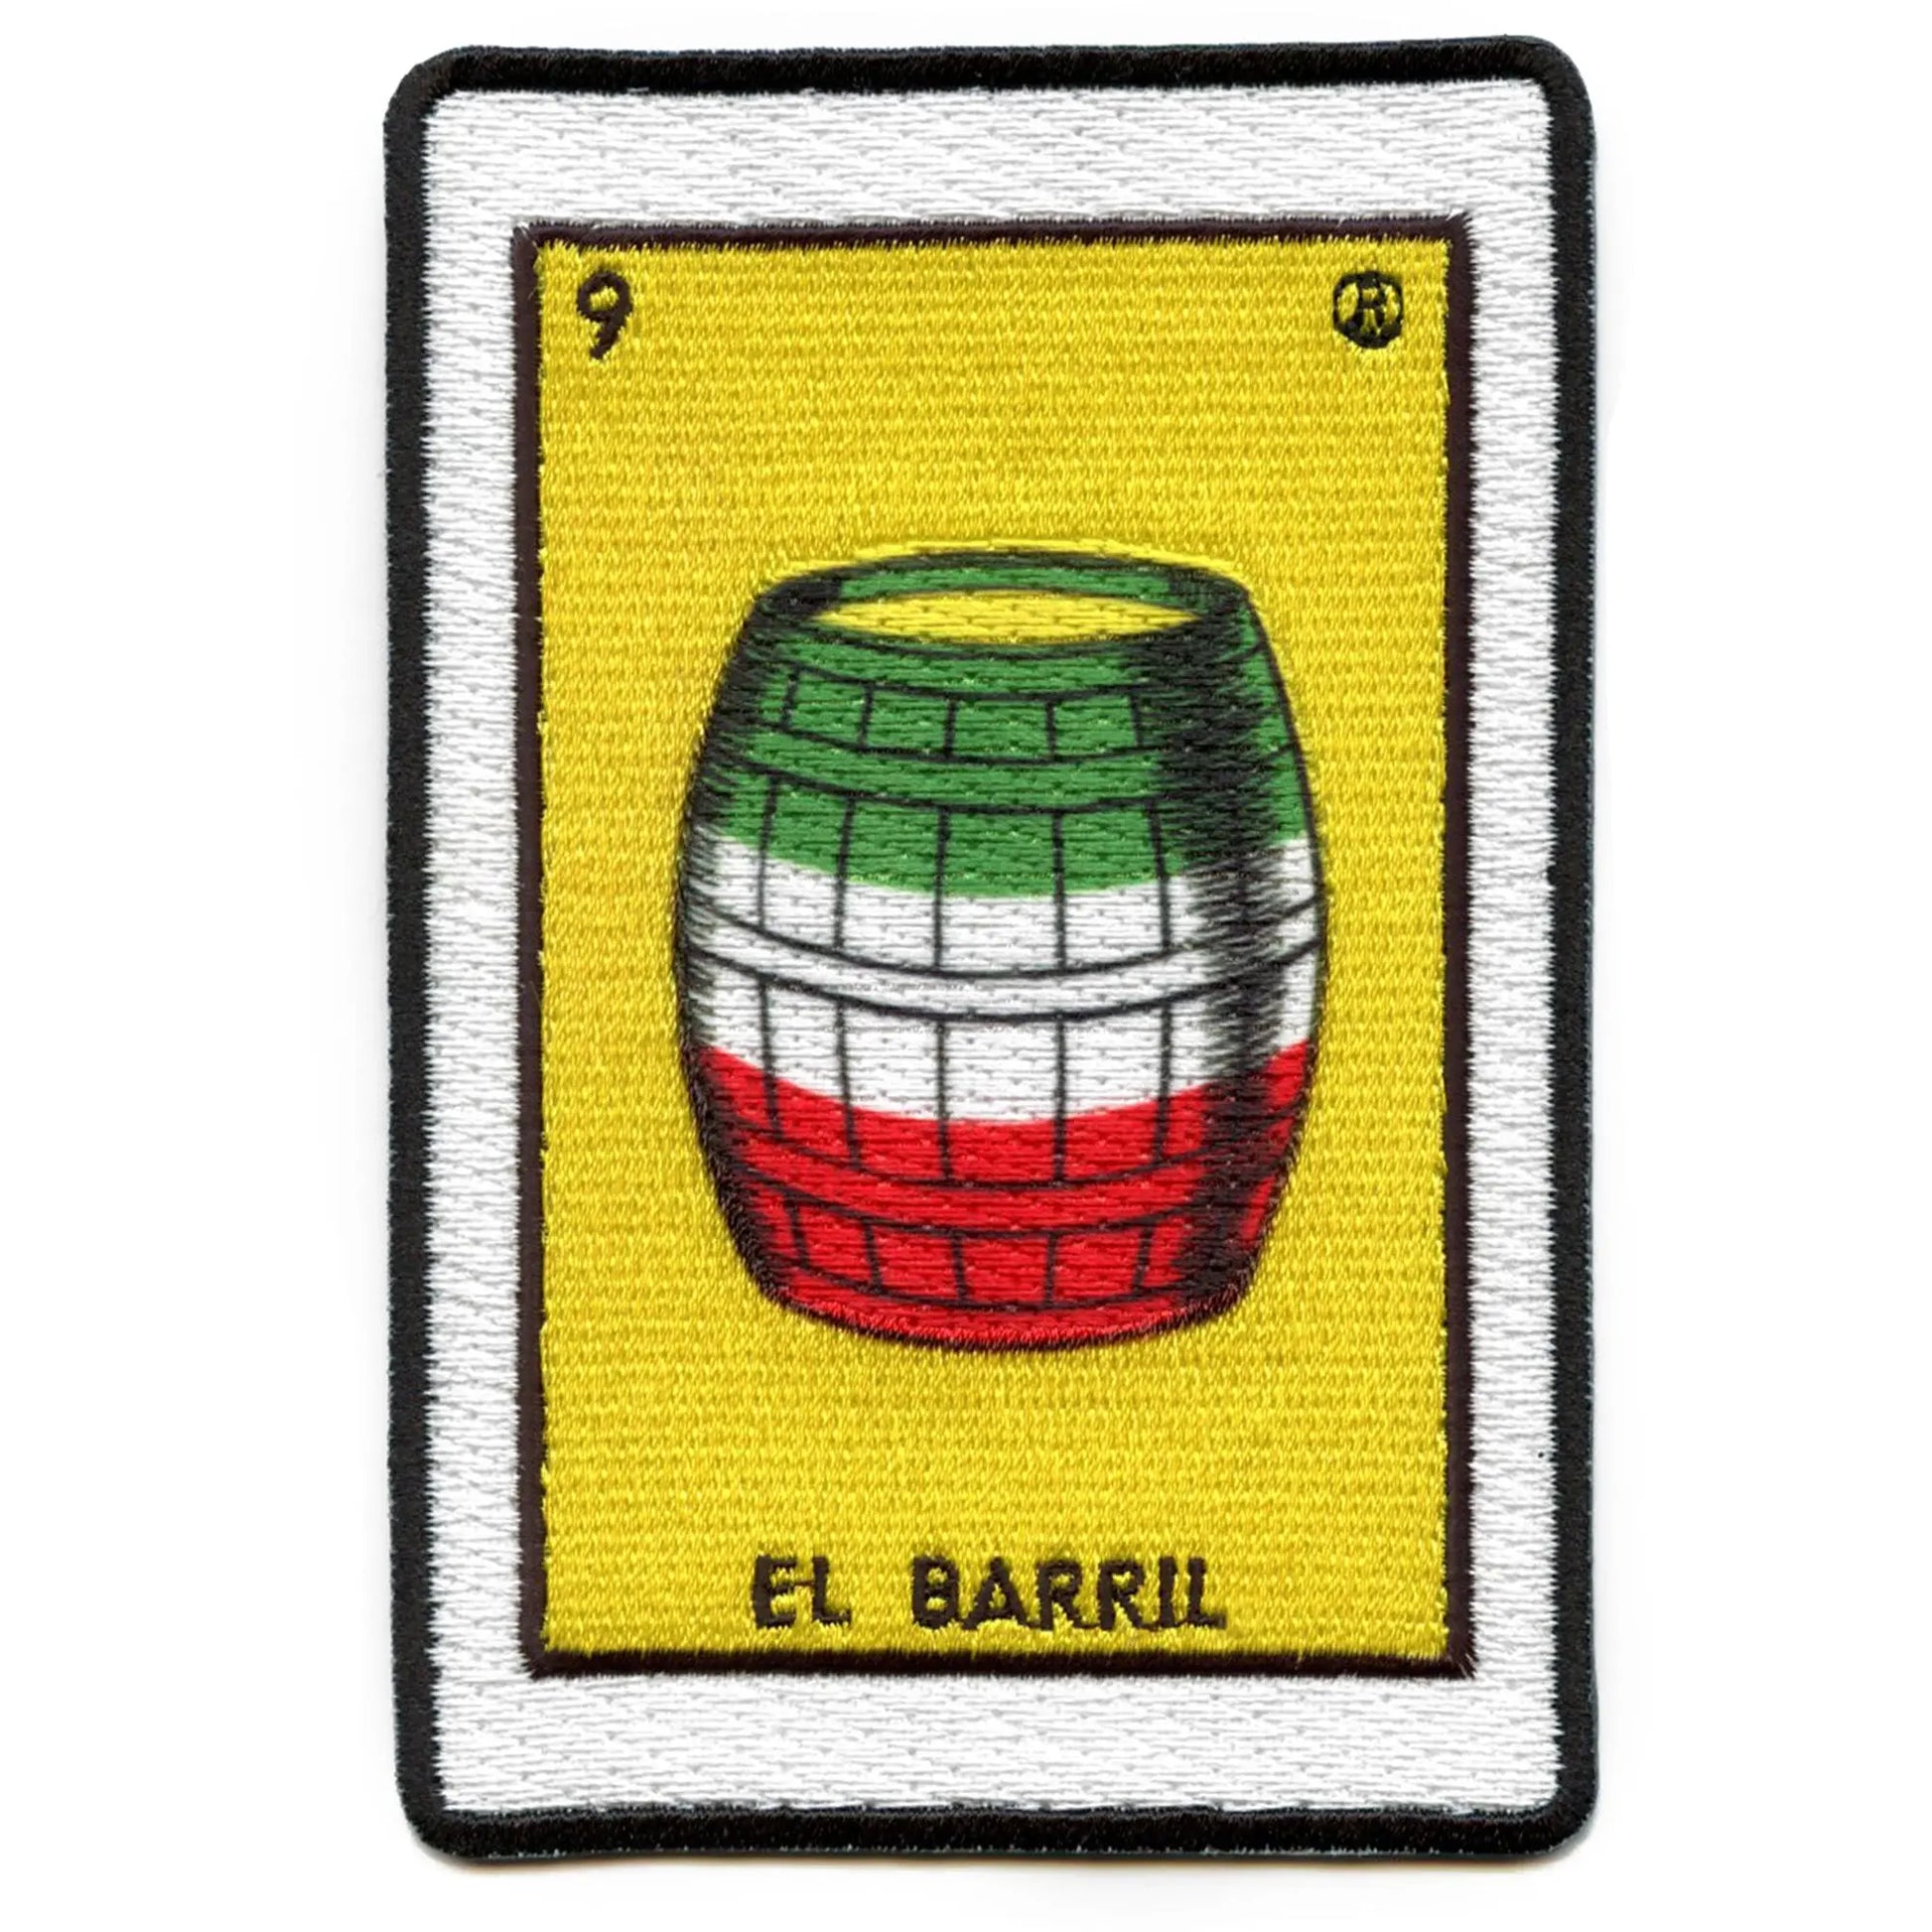 El Barril 9 Patch Mexican Loteria Card Sublimated Embroidery Iron On